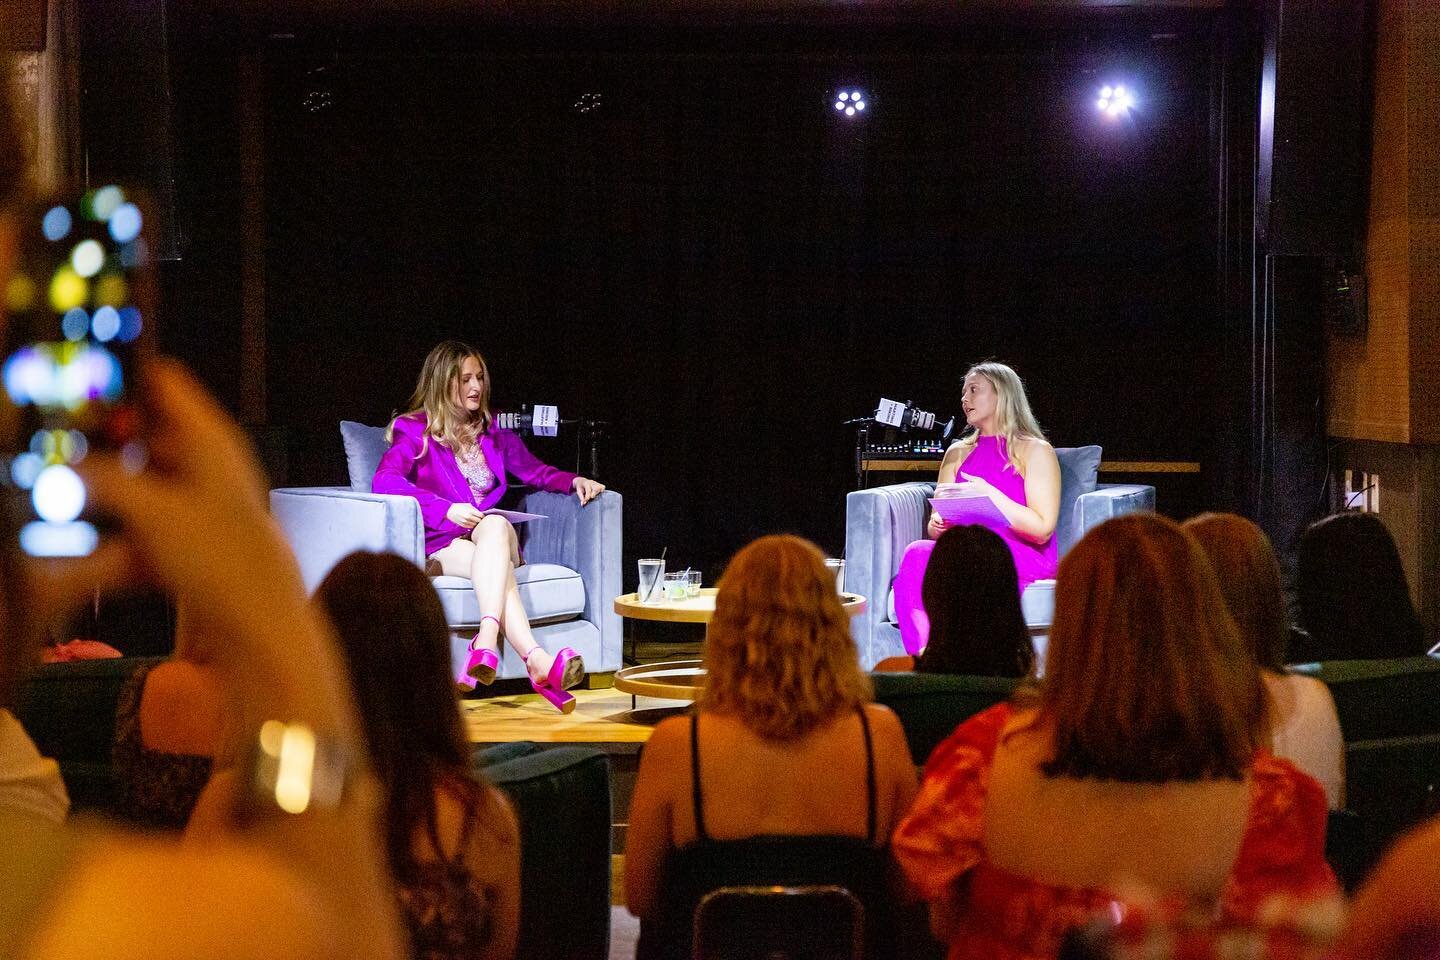 We&rsquo;re still on a high from last week&rsquo;s live podcast recording with @veronicadroulia and @lilyrakow at @elreyva